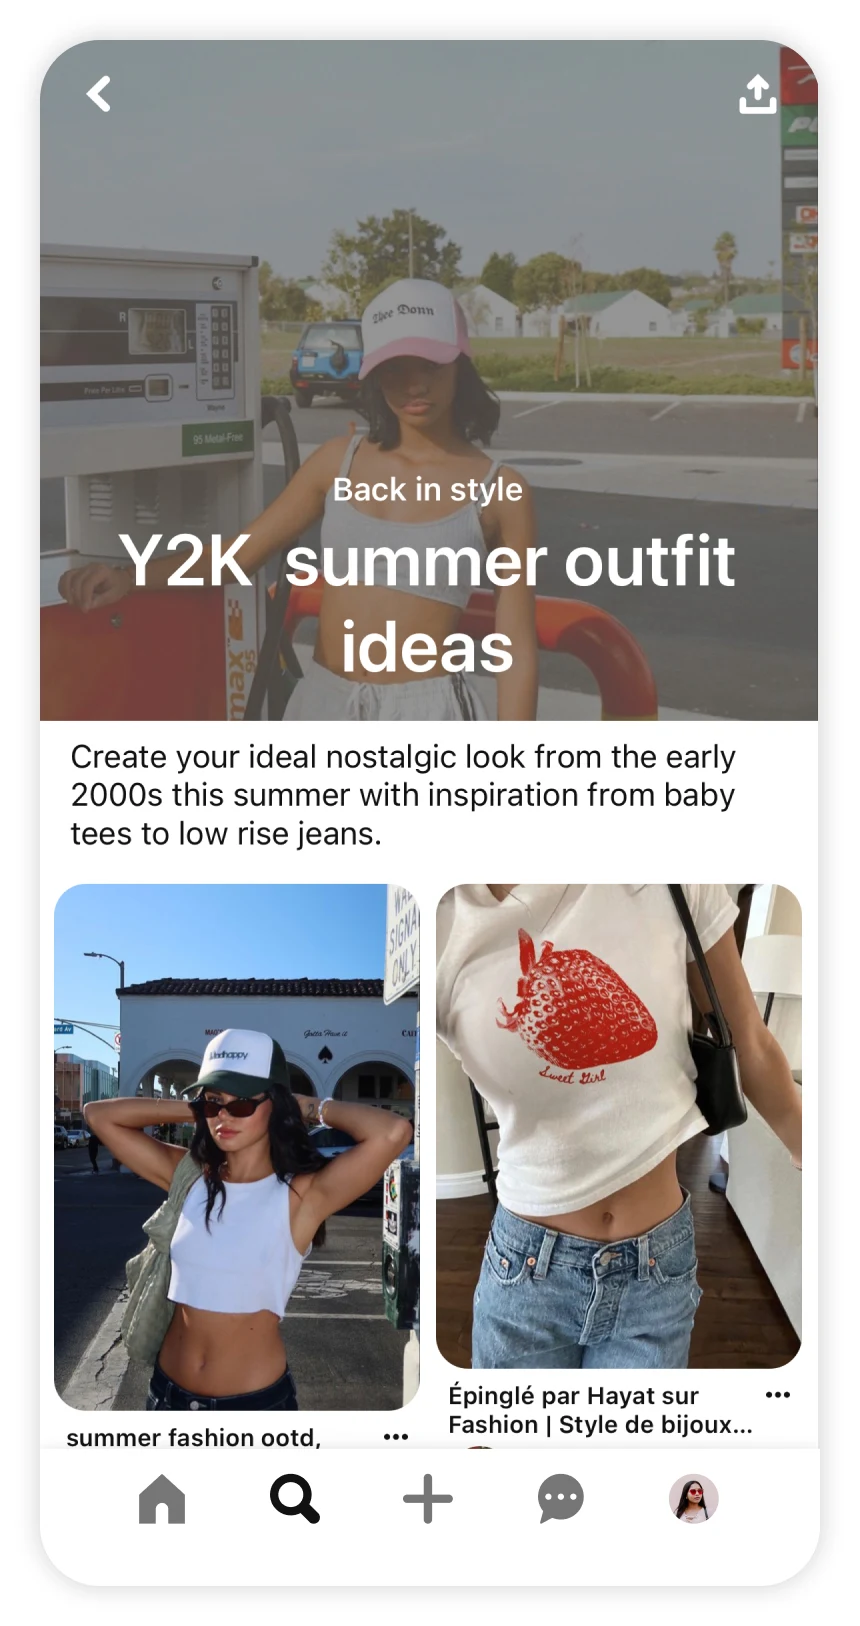 Screen shot of Pinterest app showing trend article for Y2K summer outfit ideas